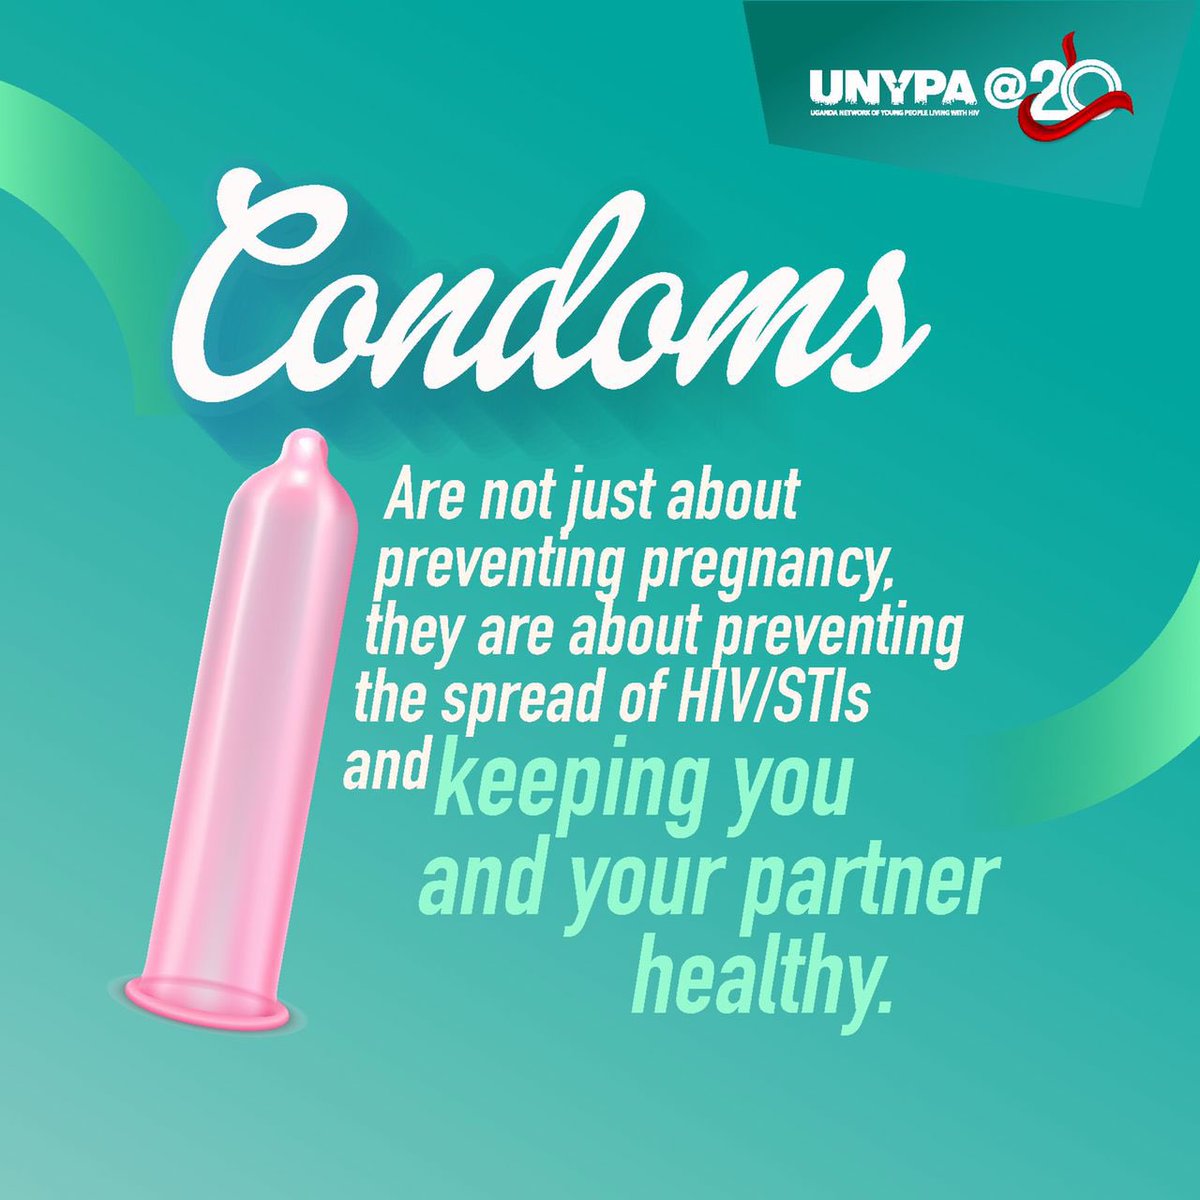 Temptations are meant to happen but remember to always #UseACondom 
when engaging in any sexual activity with your partner. Stay safe. 

#UnypaAt20